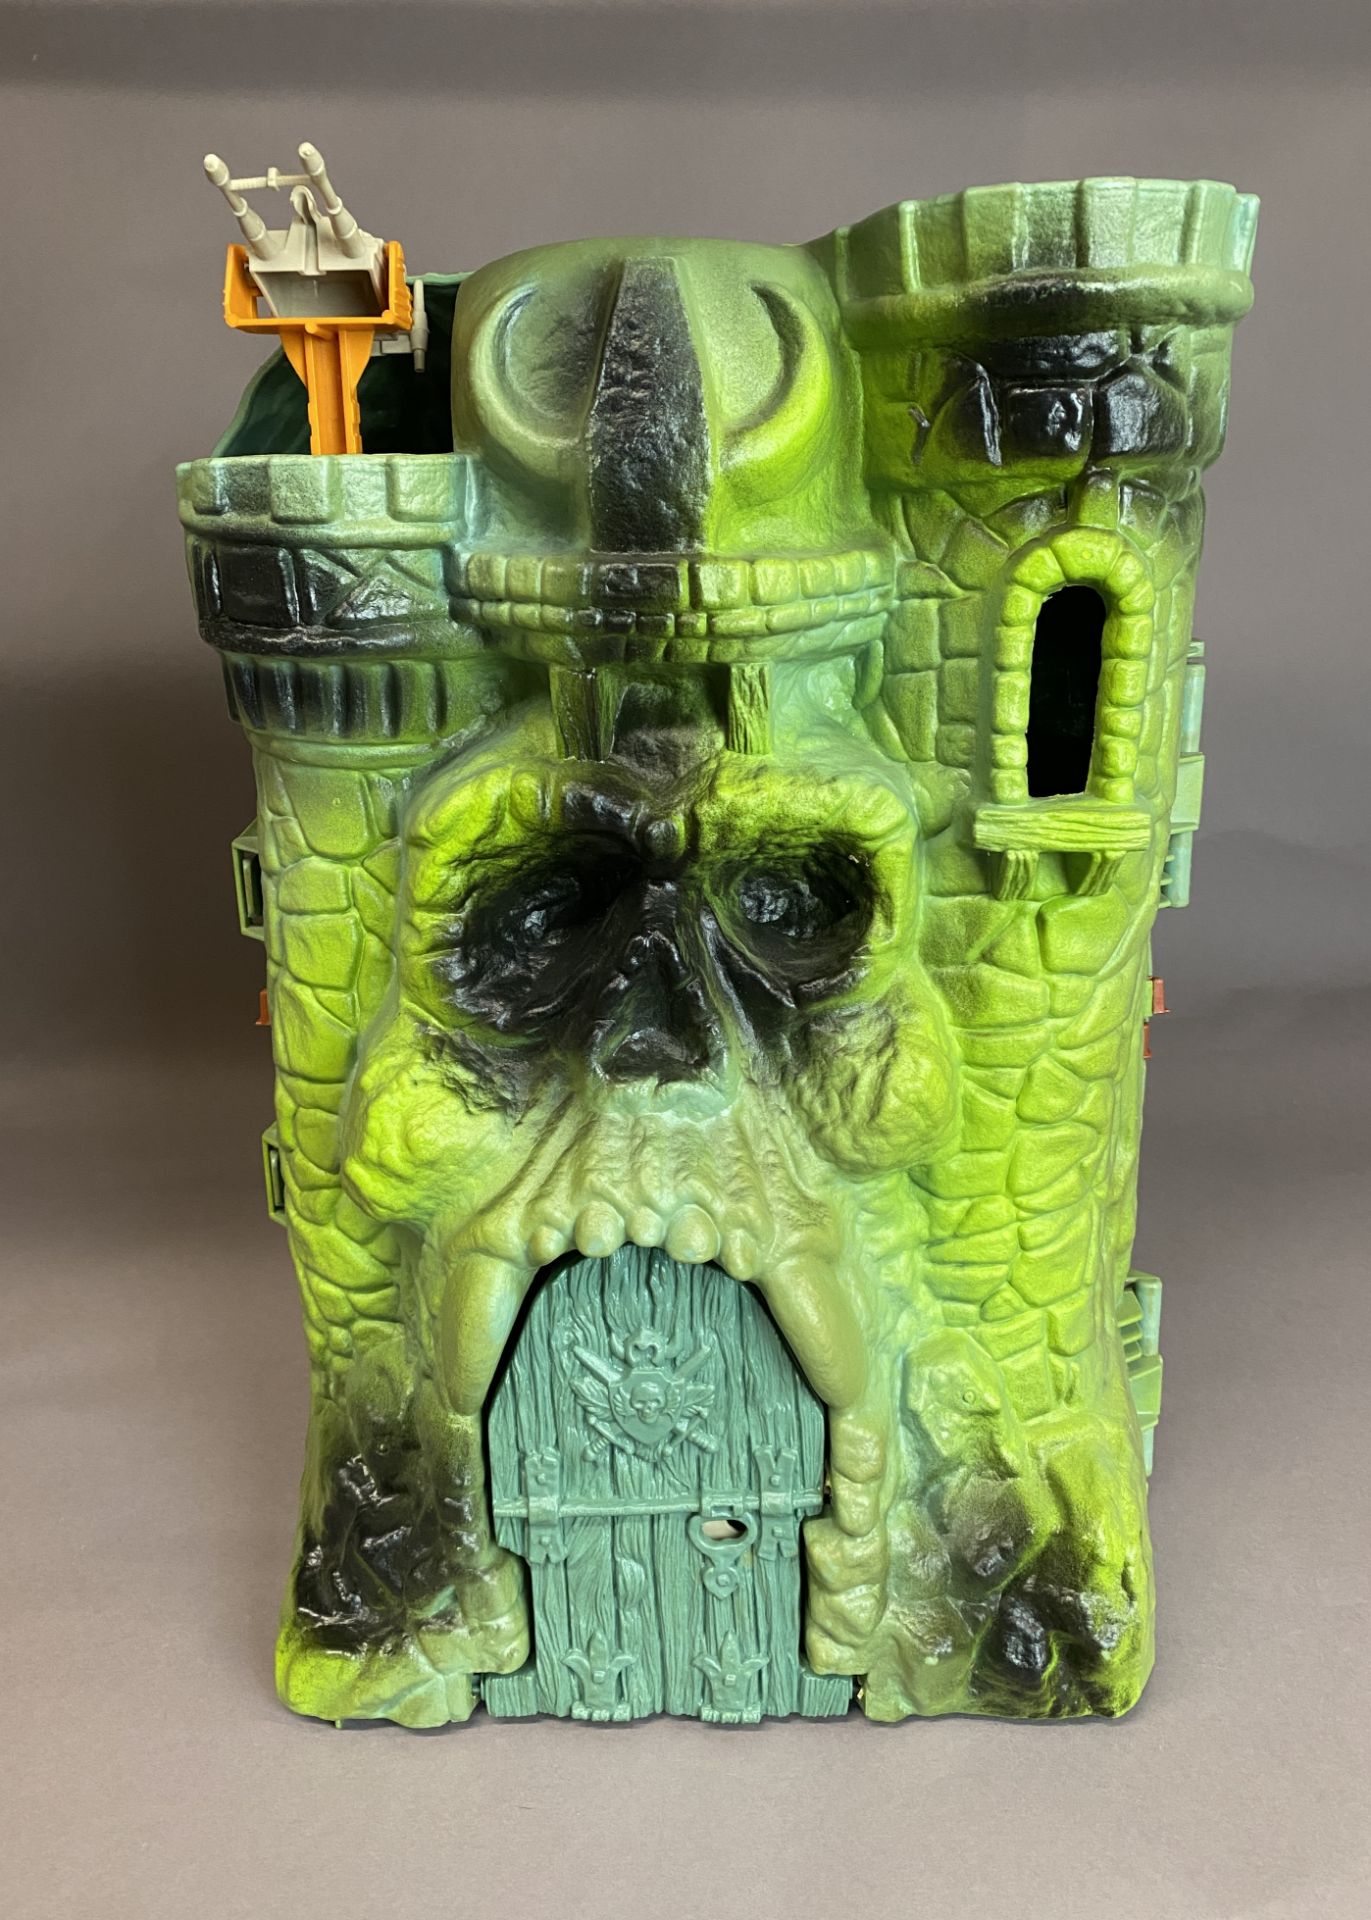 CASTLE GRAYSKULL - Vintage Masters of the Universe Playset (MOTU) - Complete with all accessories - Image 4 of 12